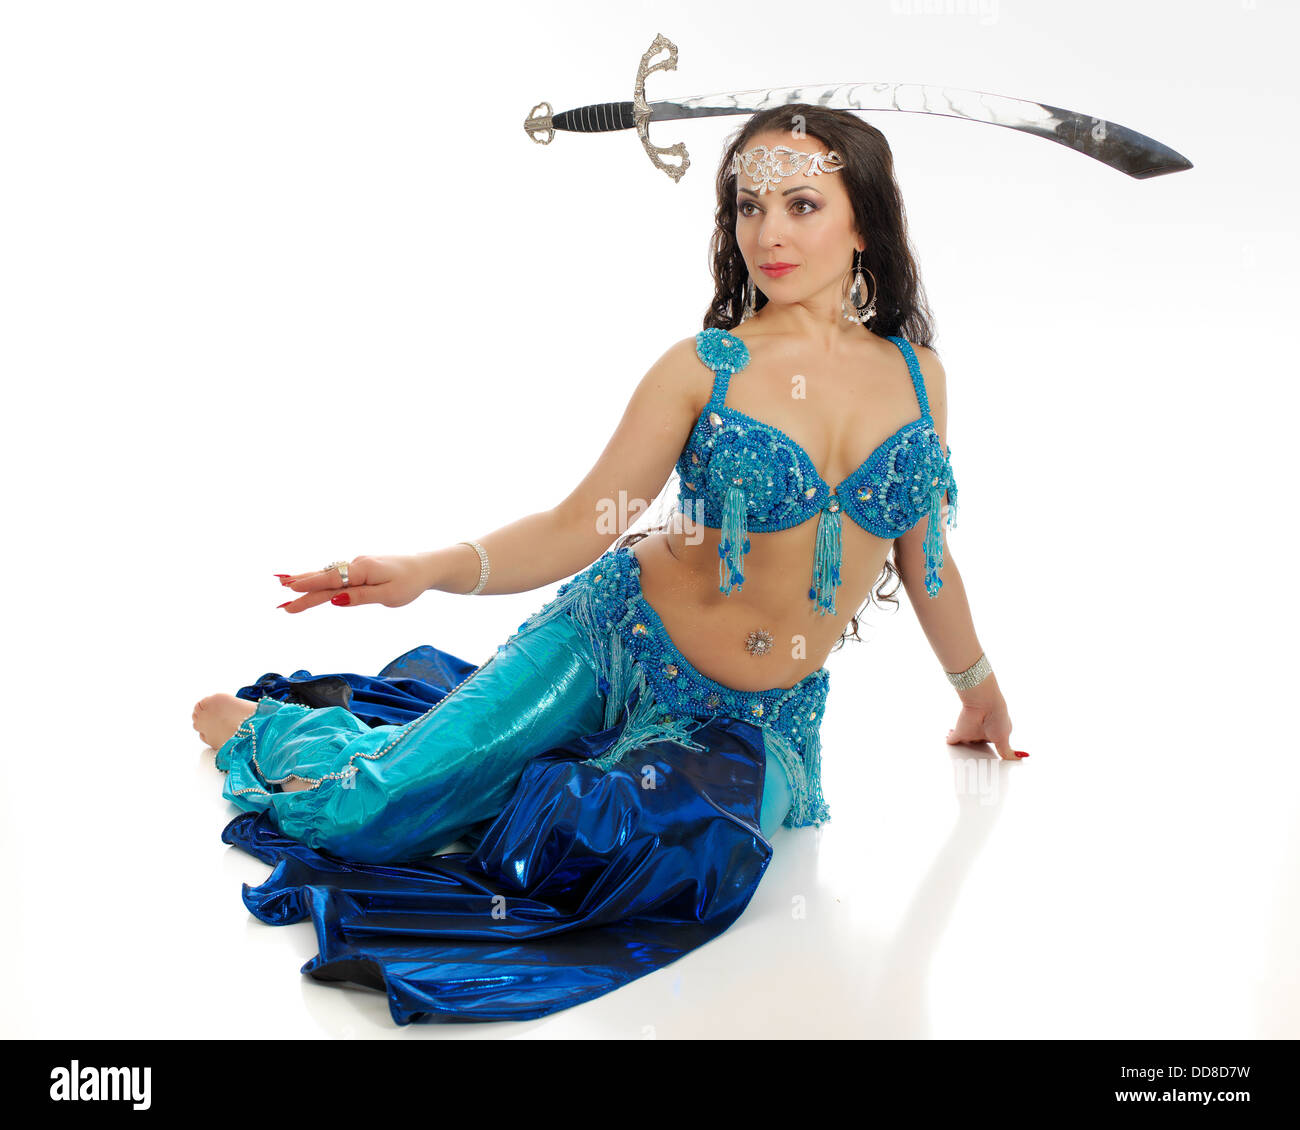 Beautiful professional bellydancer  in colorful costume posing in front of the white backdrop with a sward. Stock Photo